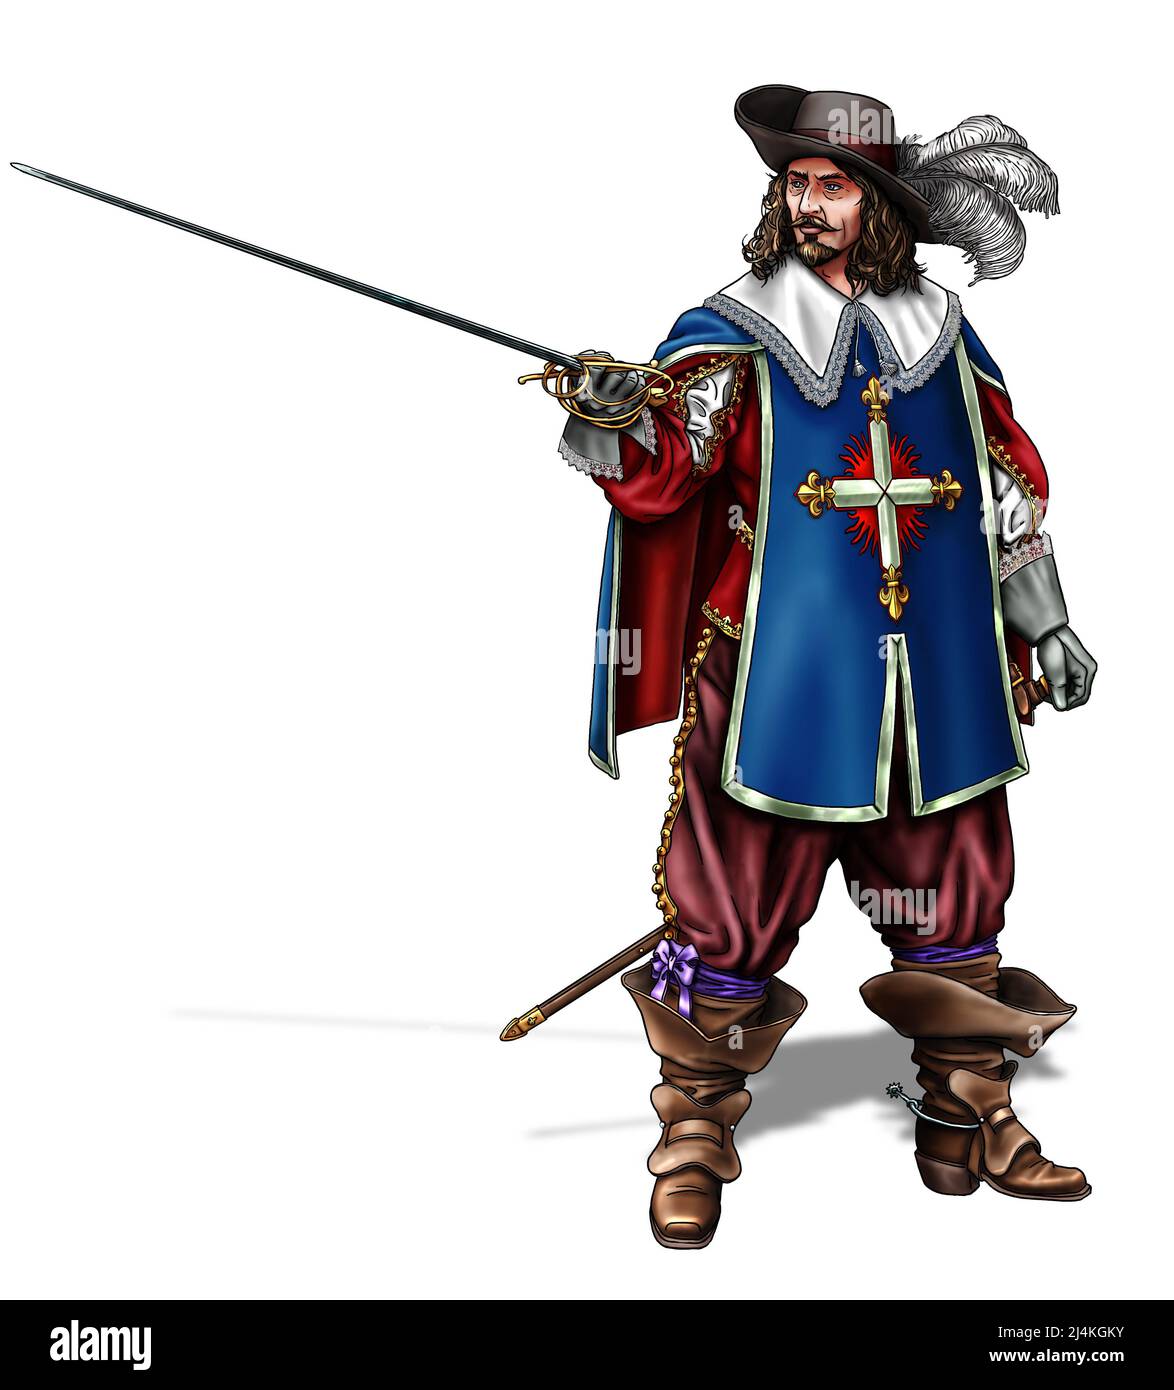 French musketeer, France 16th century. Alexander Dumas 'The Three Musketeers' Stock Photo